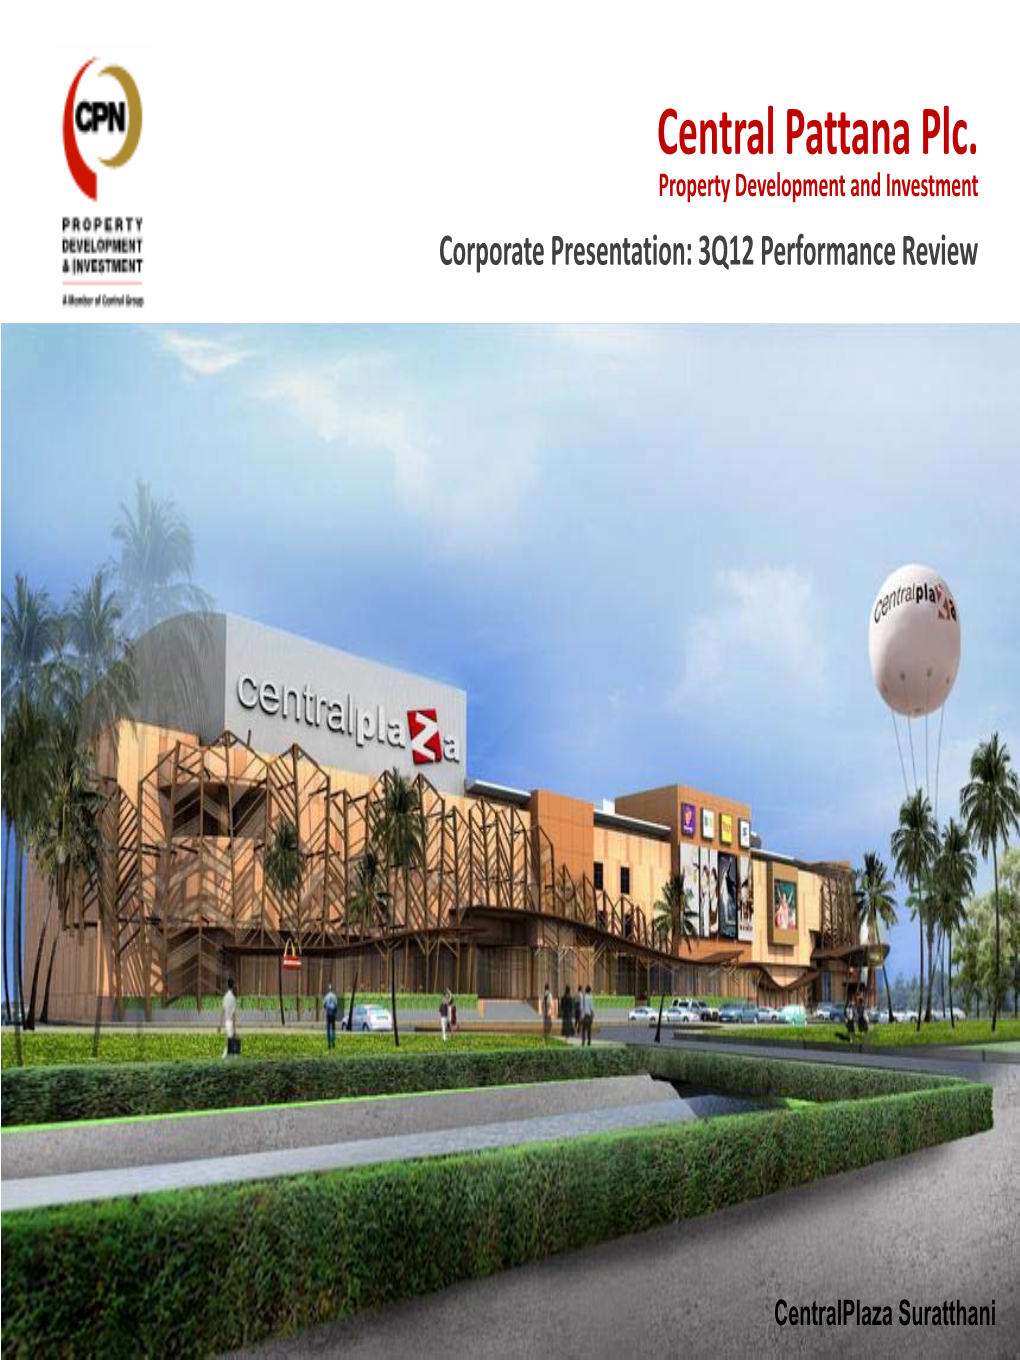 Central Pattana Plc. Property Development and Investment Corporate Presentation: 3Q12 Performance Review